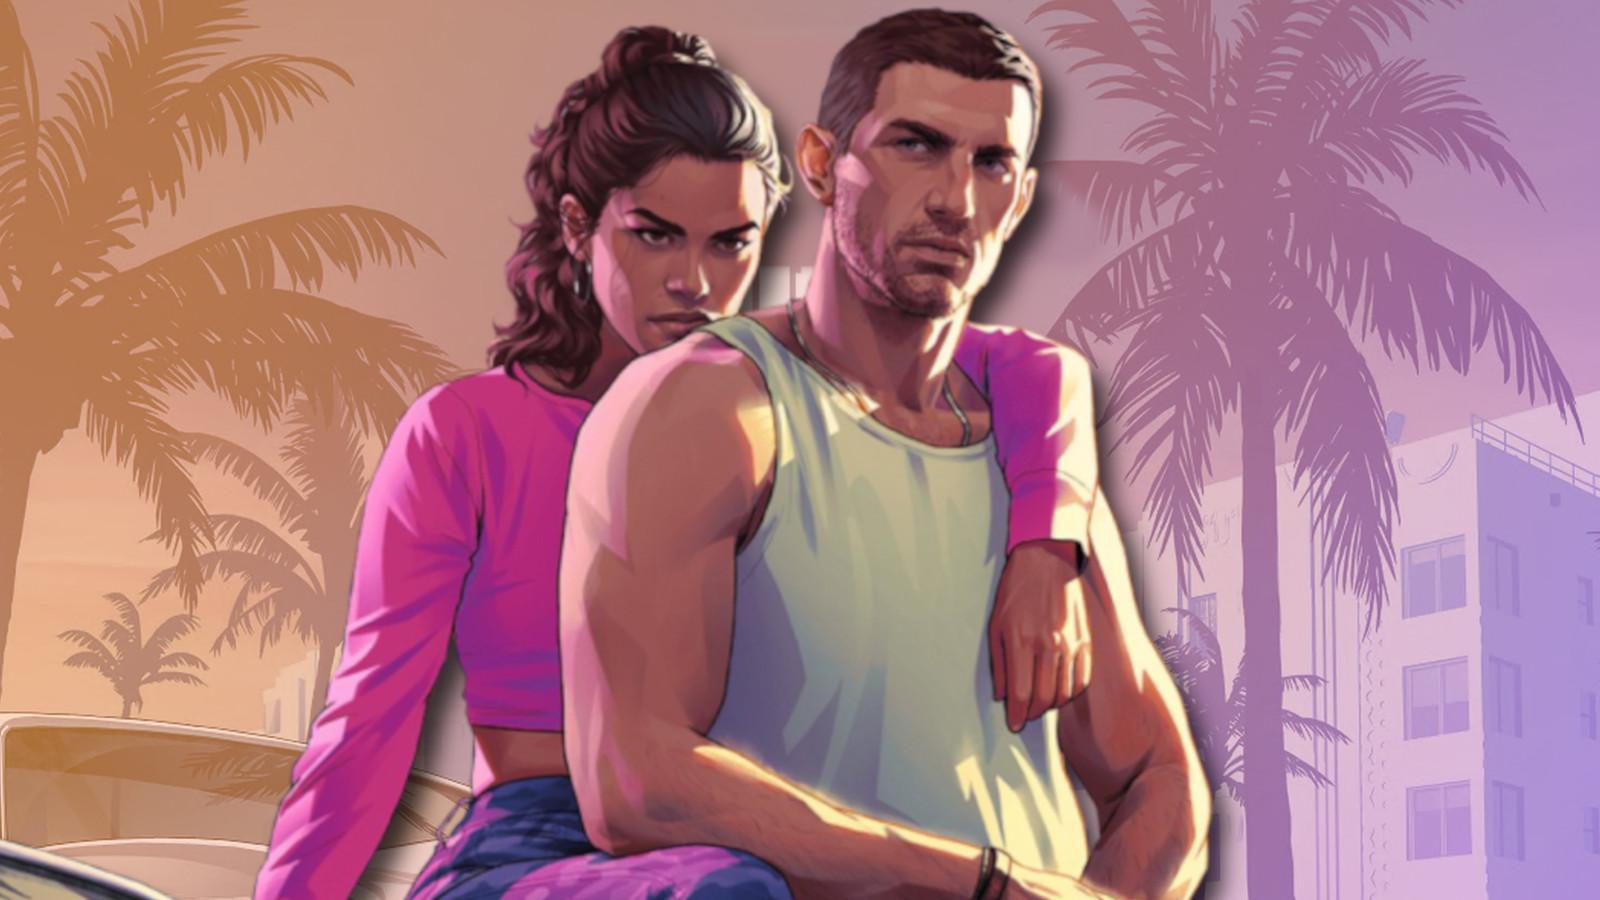 Lucia and her male partner from GTA 6